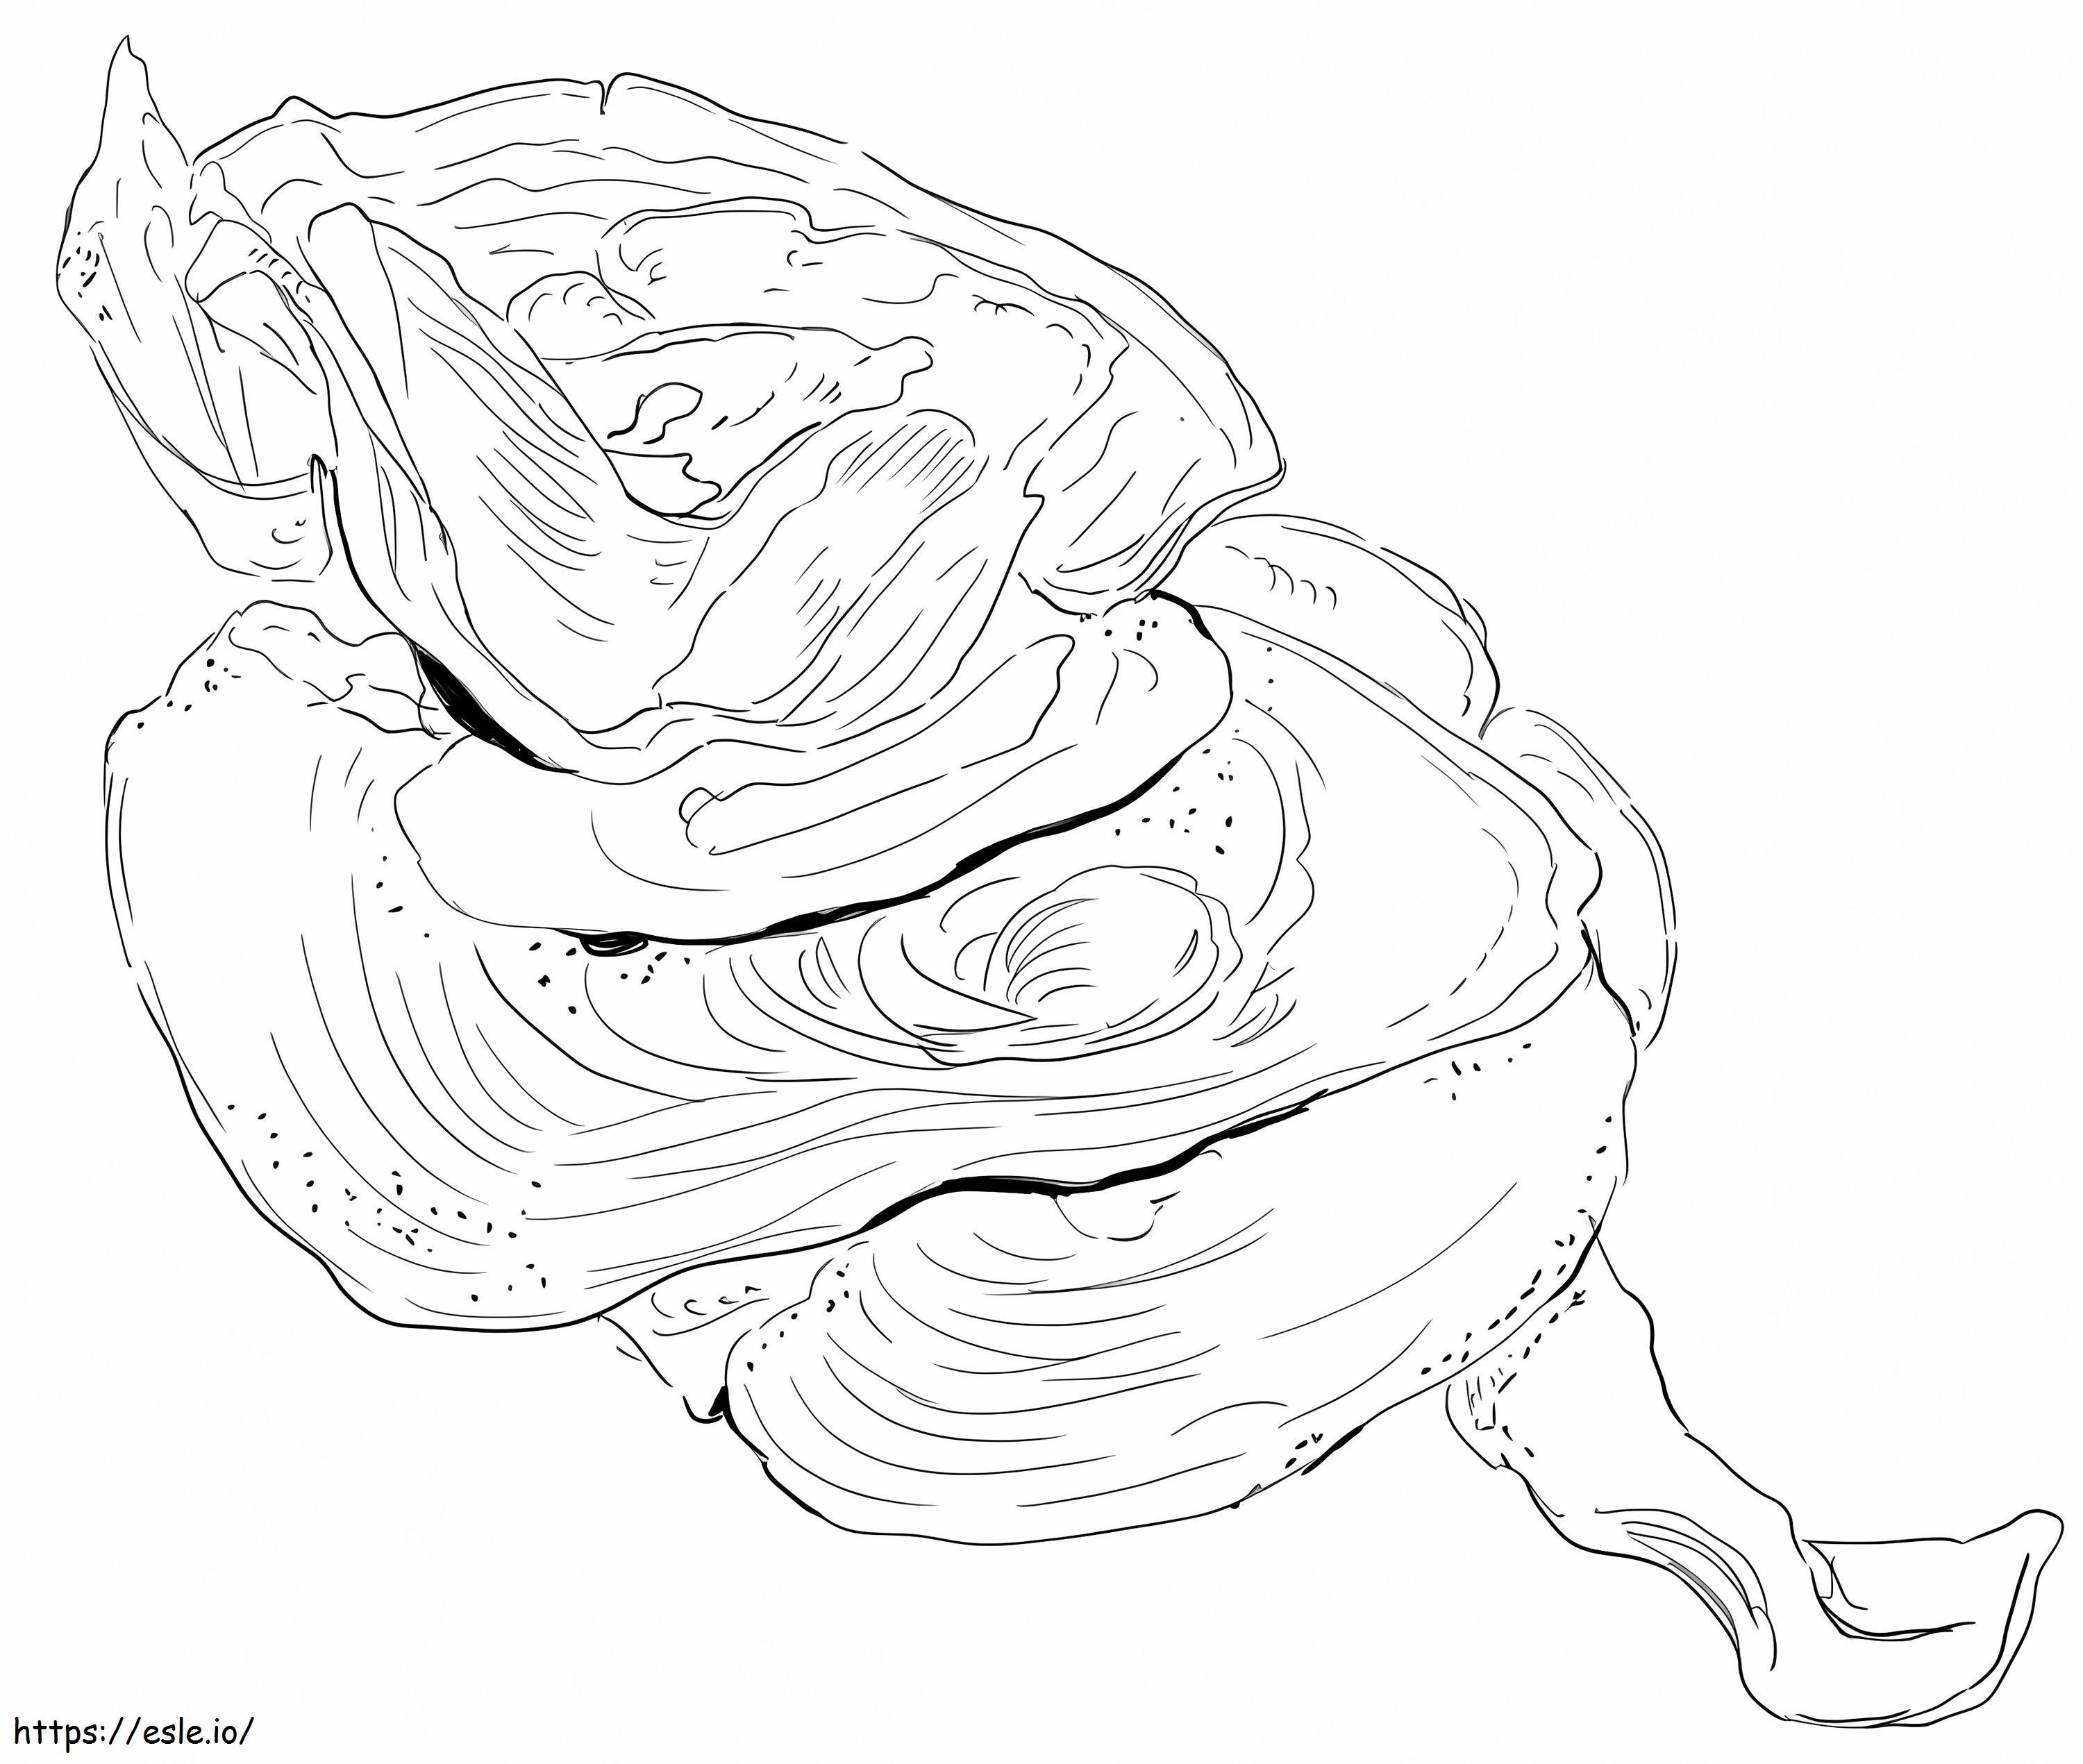 Lettuce Coral coloring page